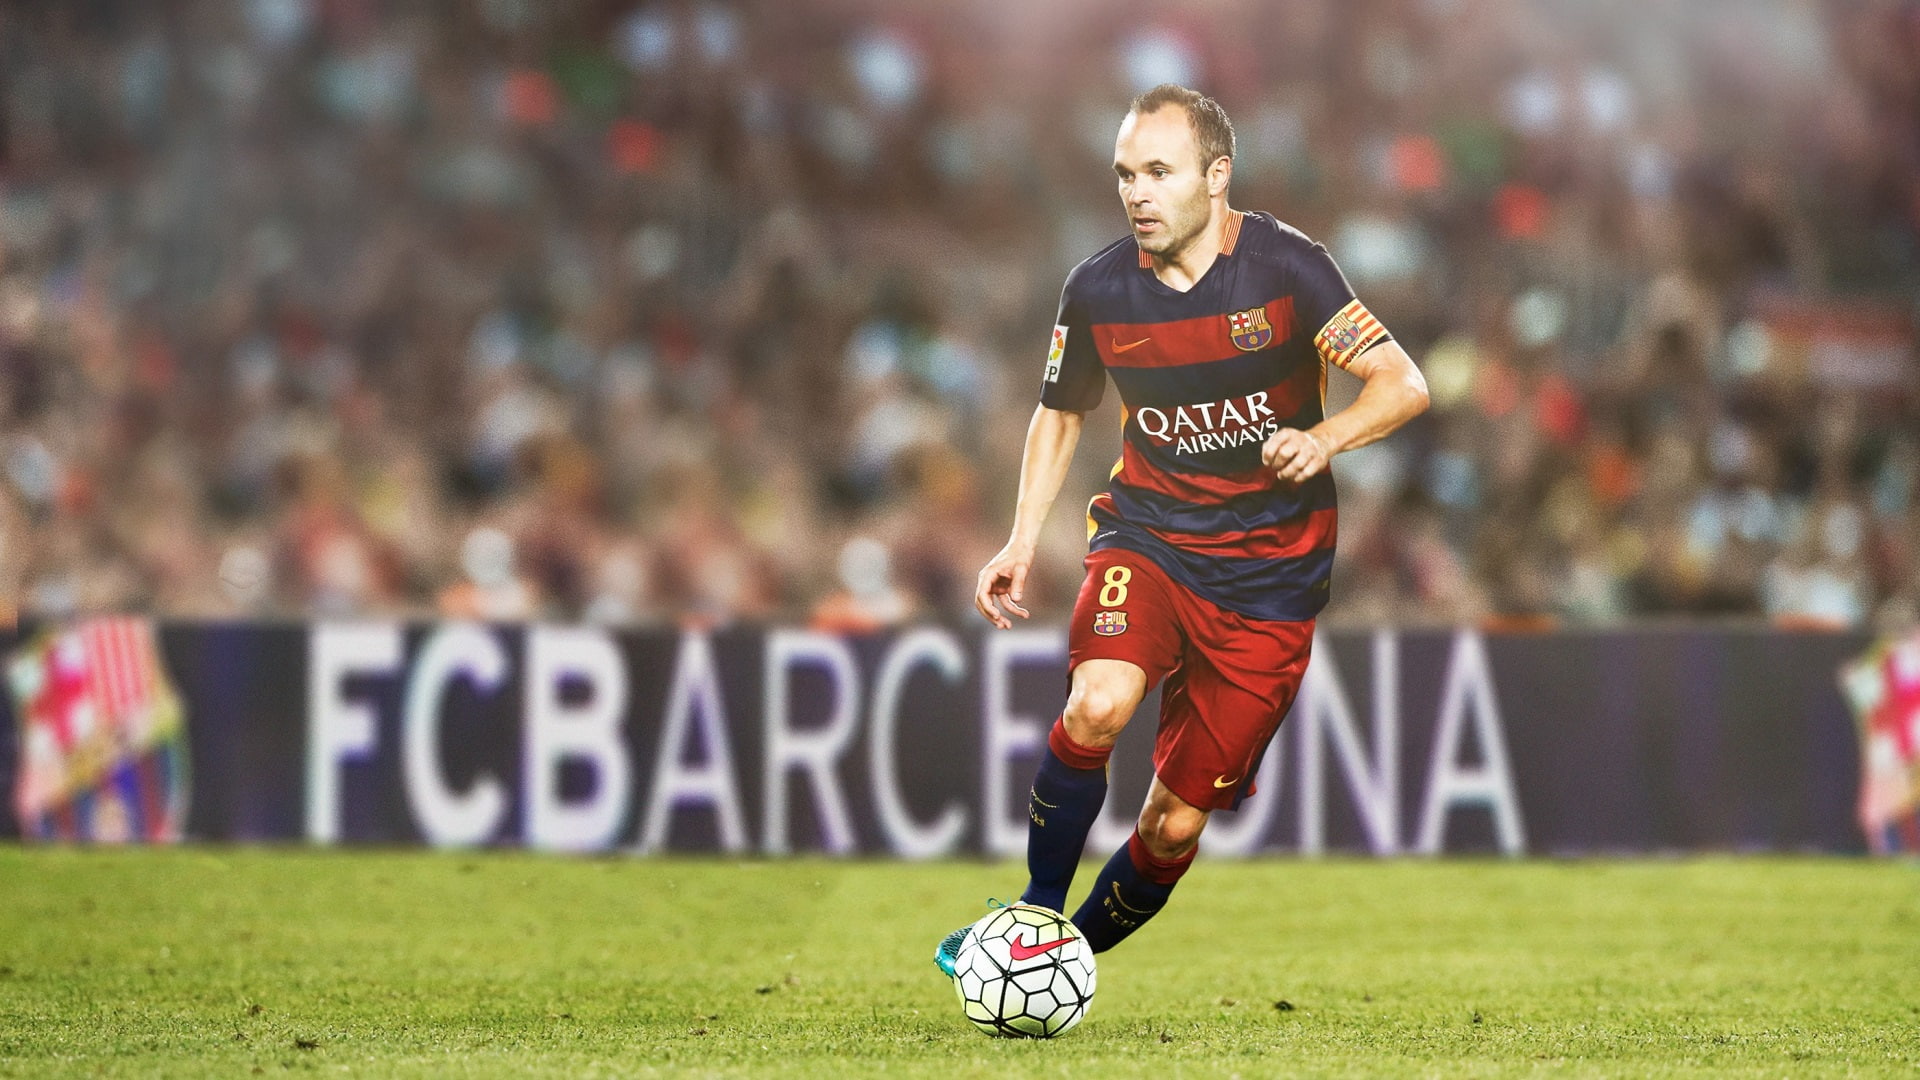 andres iniesta new picture